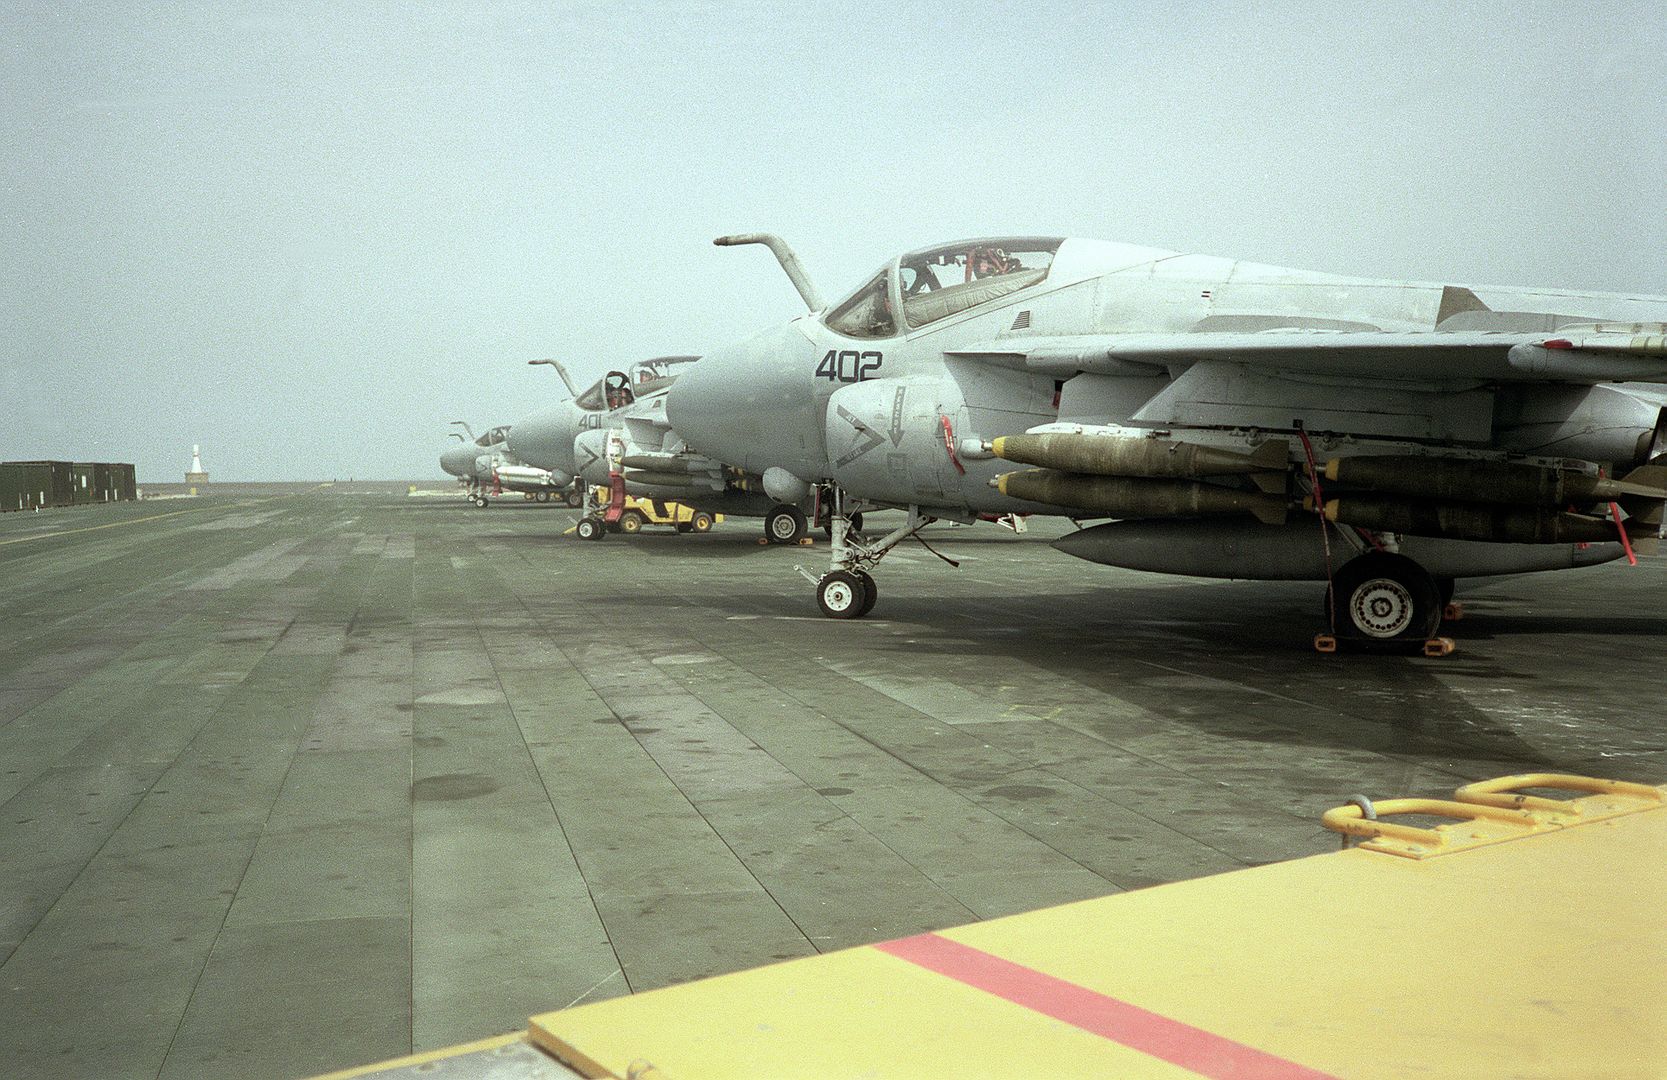 A View Of Marine Aircraft Group 11 A 6E Intruder Aircraft Sitting On The Flight Line With Full Ordnance Loads During Operation DESERT STORM